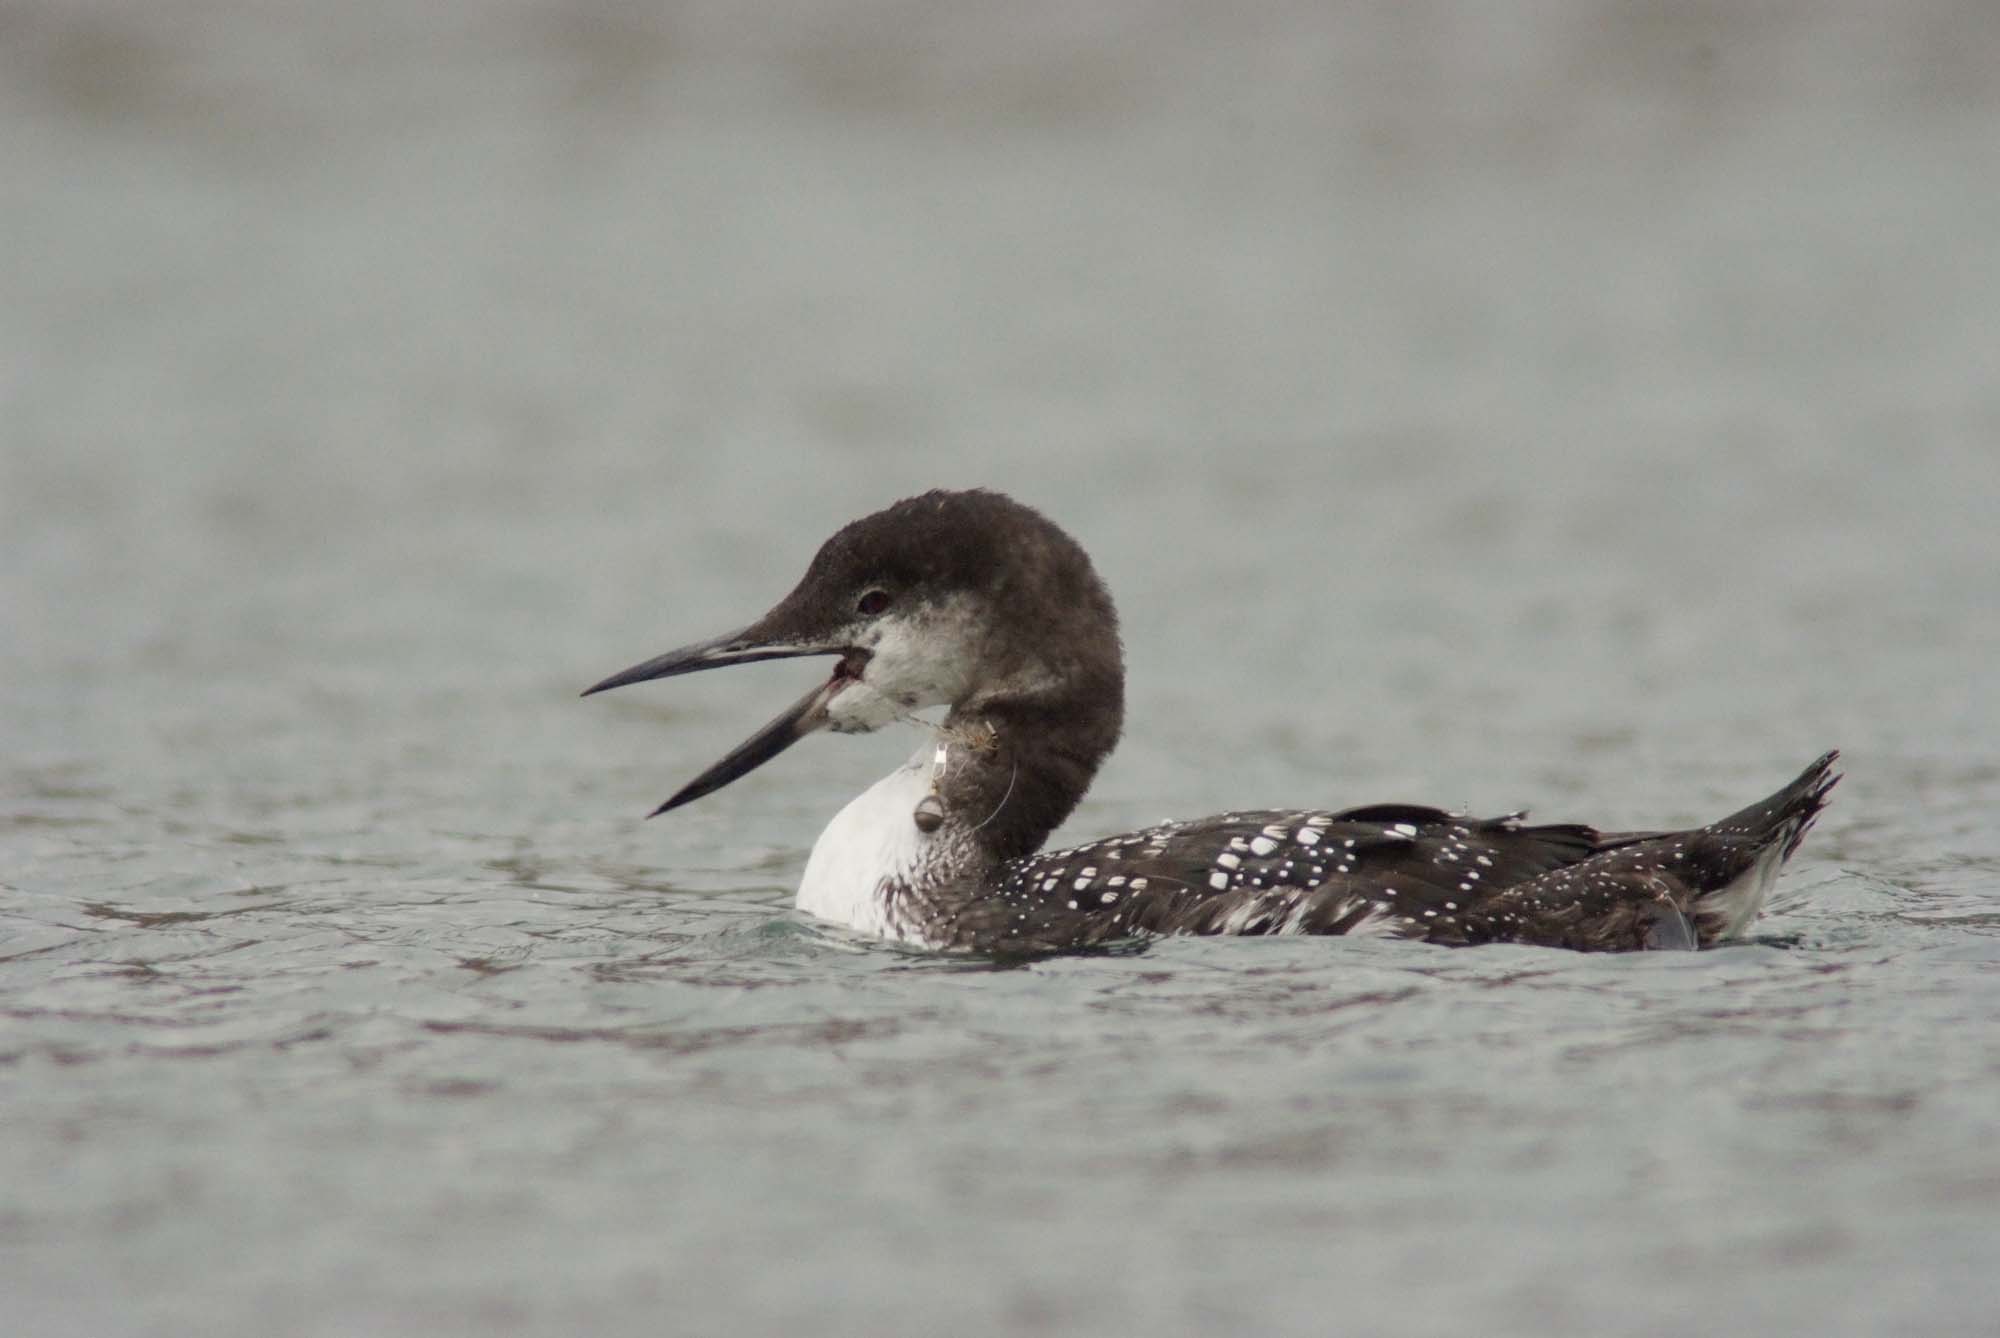 Loon entangled in fishing line during in November. The loon has undergone most of its fall molt. Photo by Ray Richer